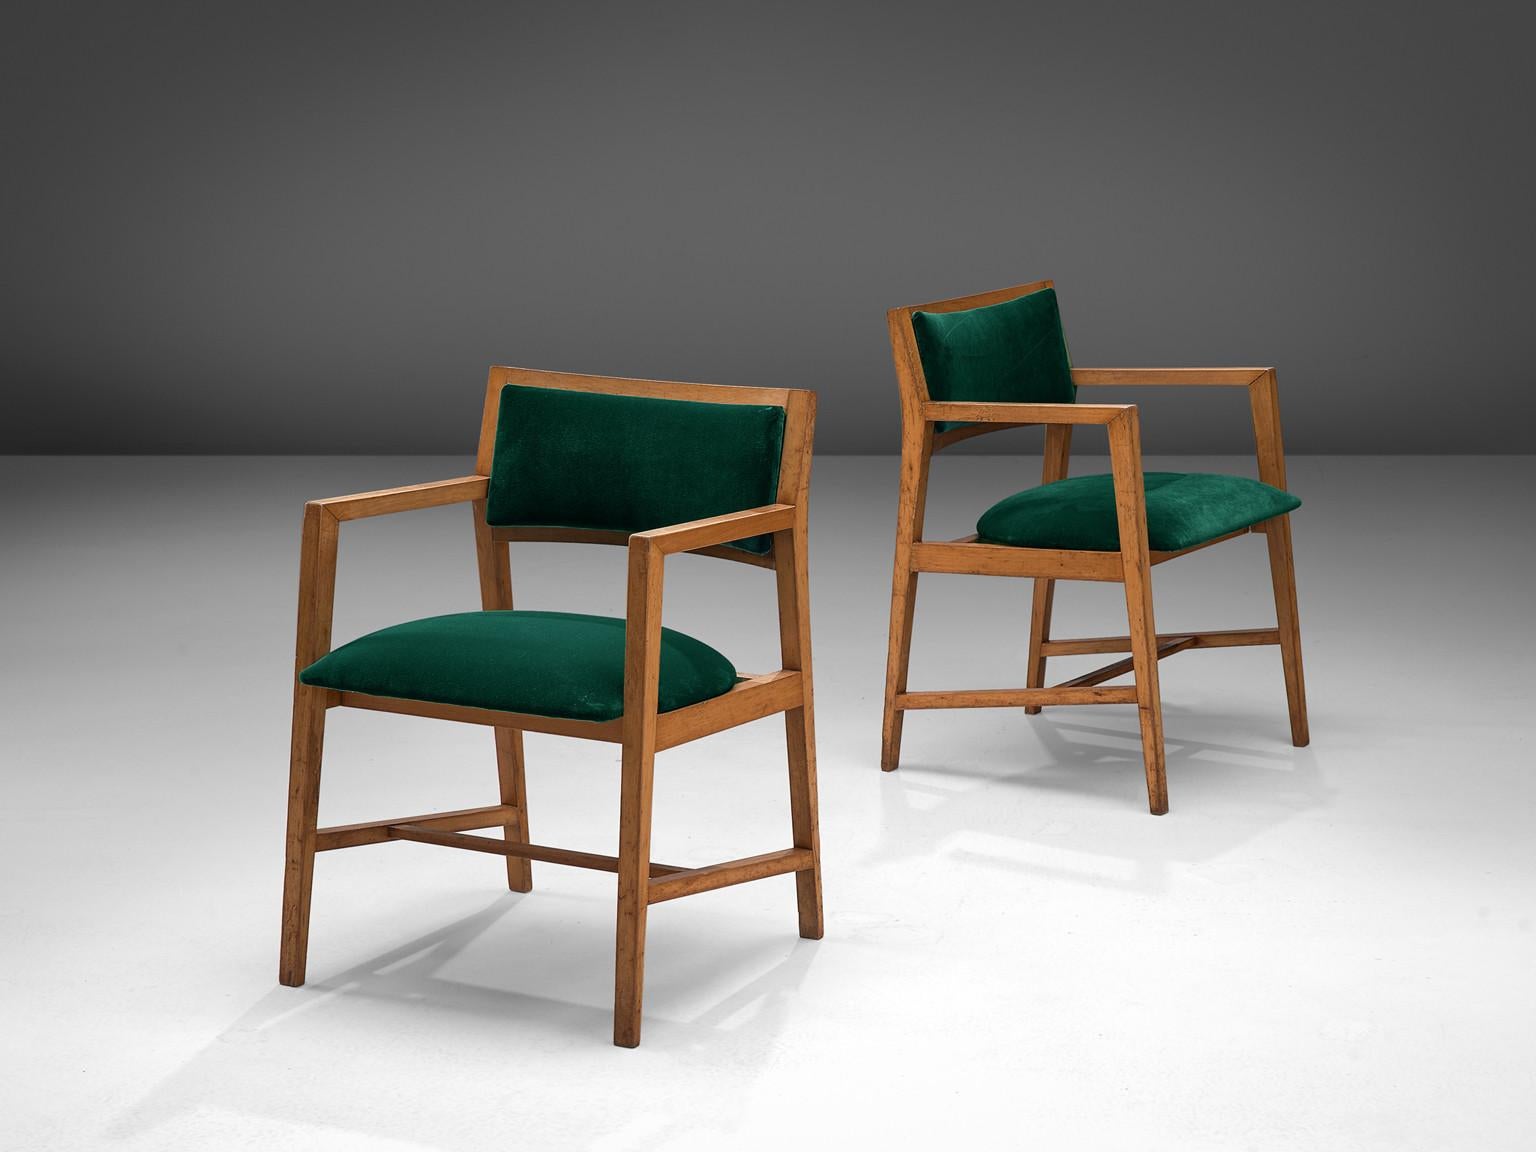 Edward Wormley for Dunbar, pair of armchairs, beech, velvet, United States, 1960s

These armchairs are designed by Edward Wormley for the furniture company Dunbar in the sixties. The construction is characterized by a strict angular and open look.